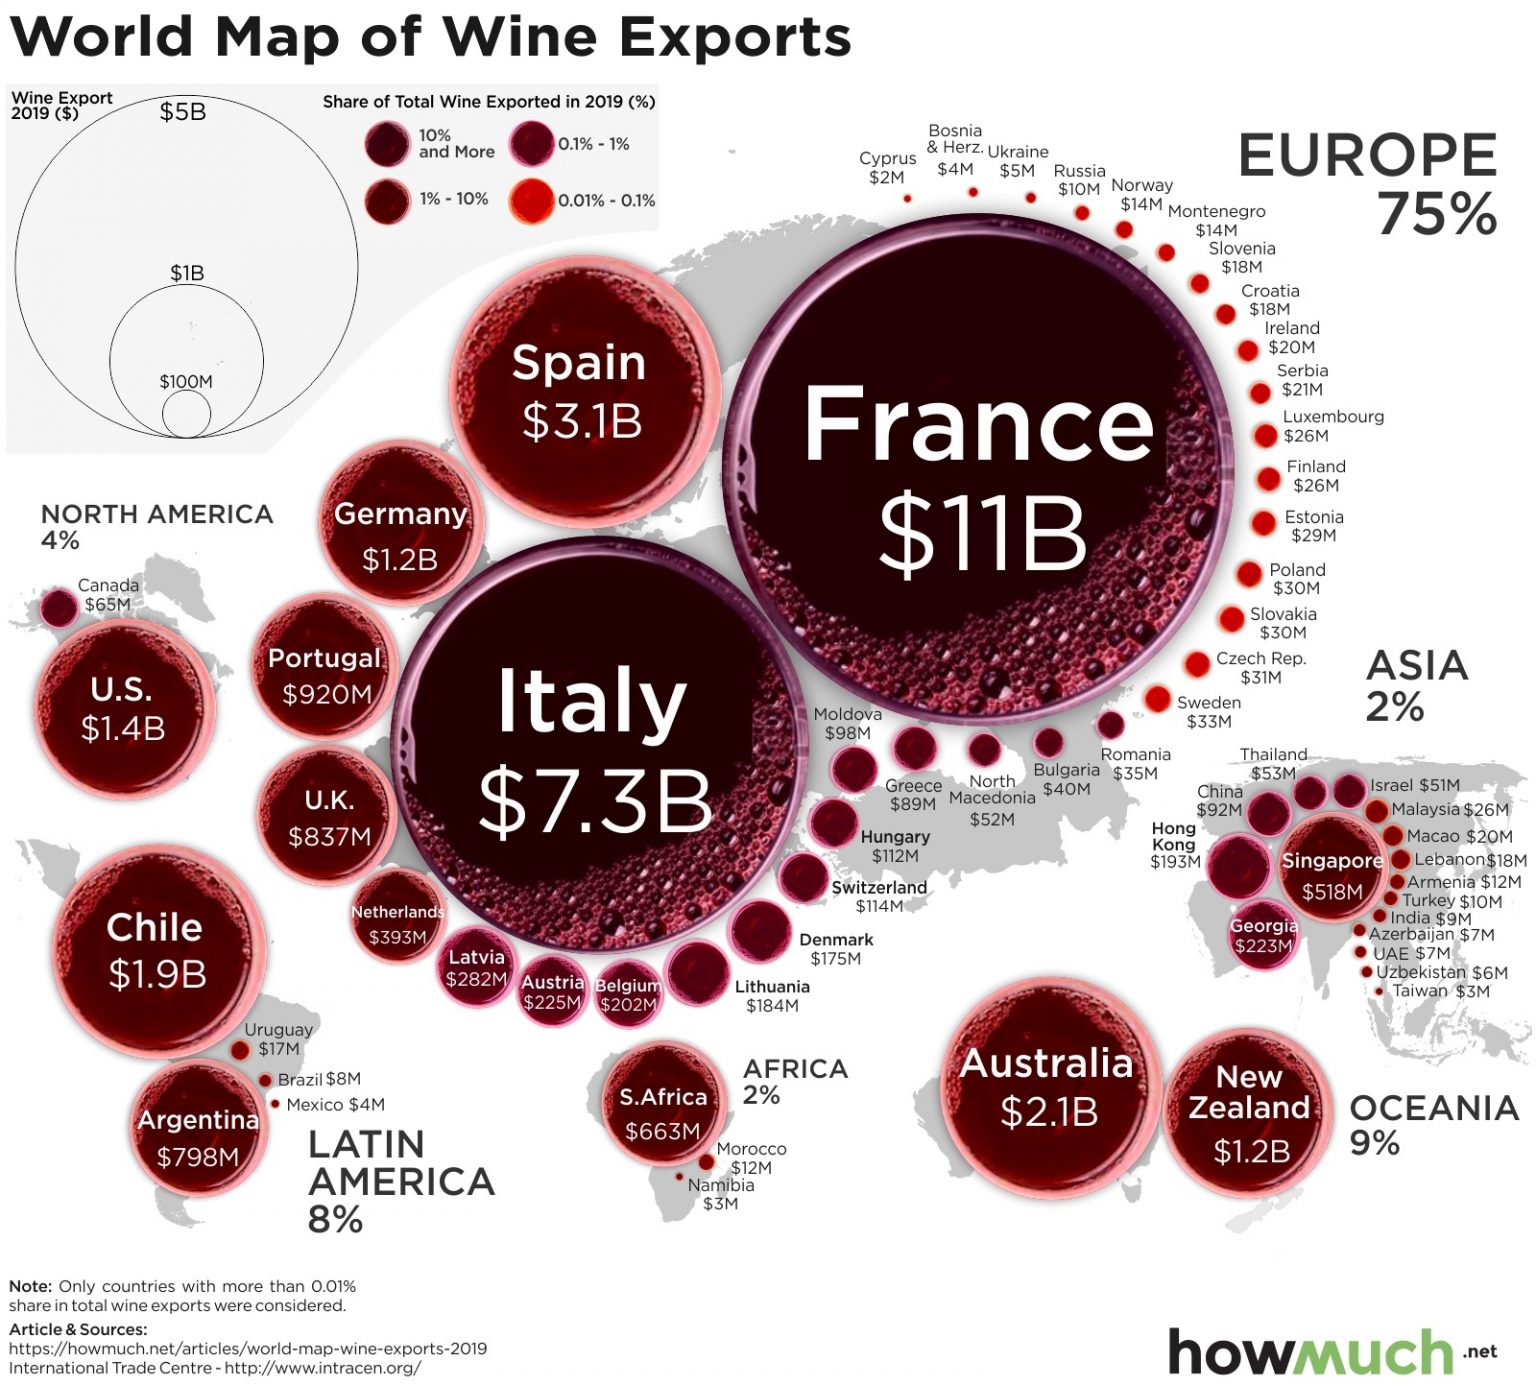 Map The World Of Wine Exports The Sounding Line 4751